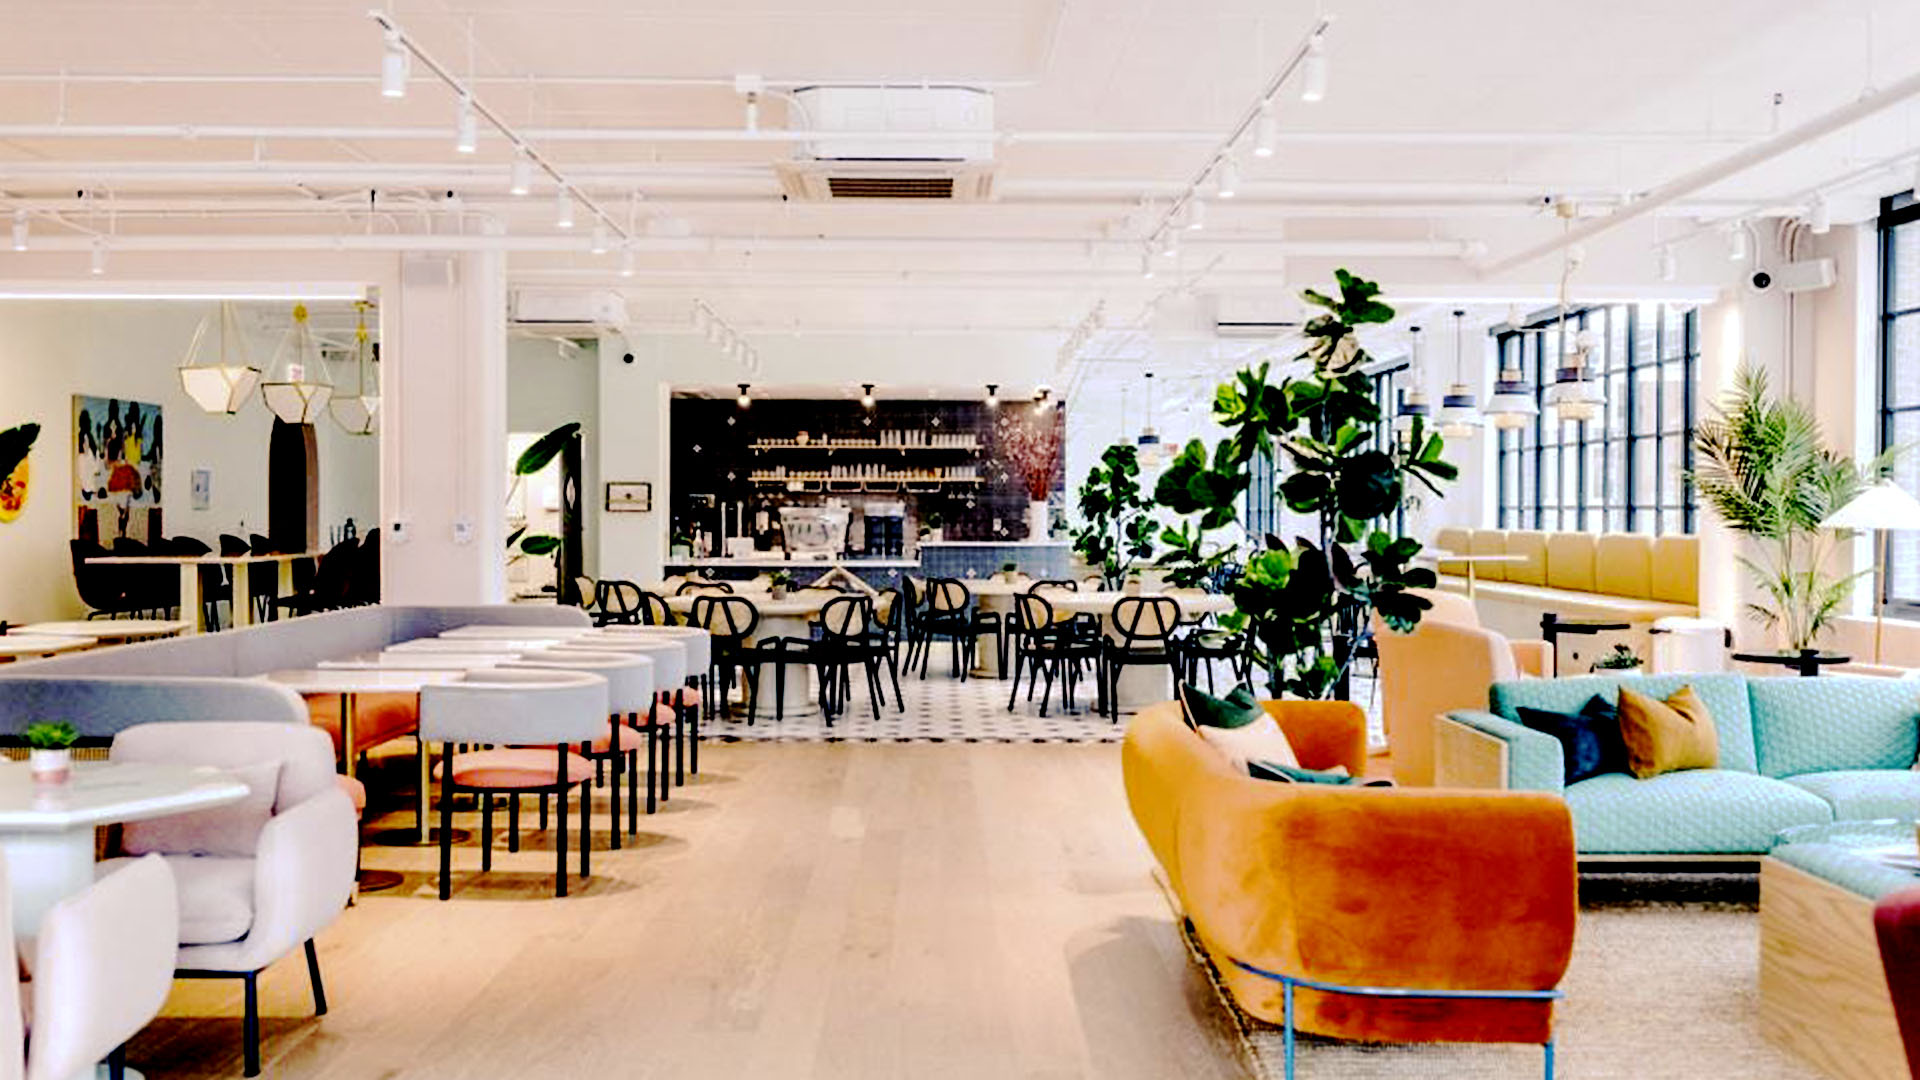 How Coworking Companies Like The Wing And Industrious Are Intersecting With Retail